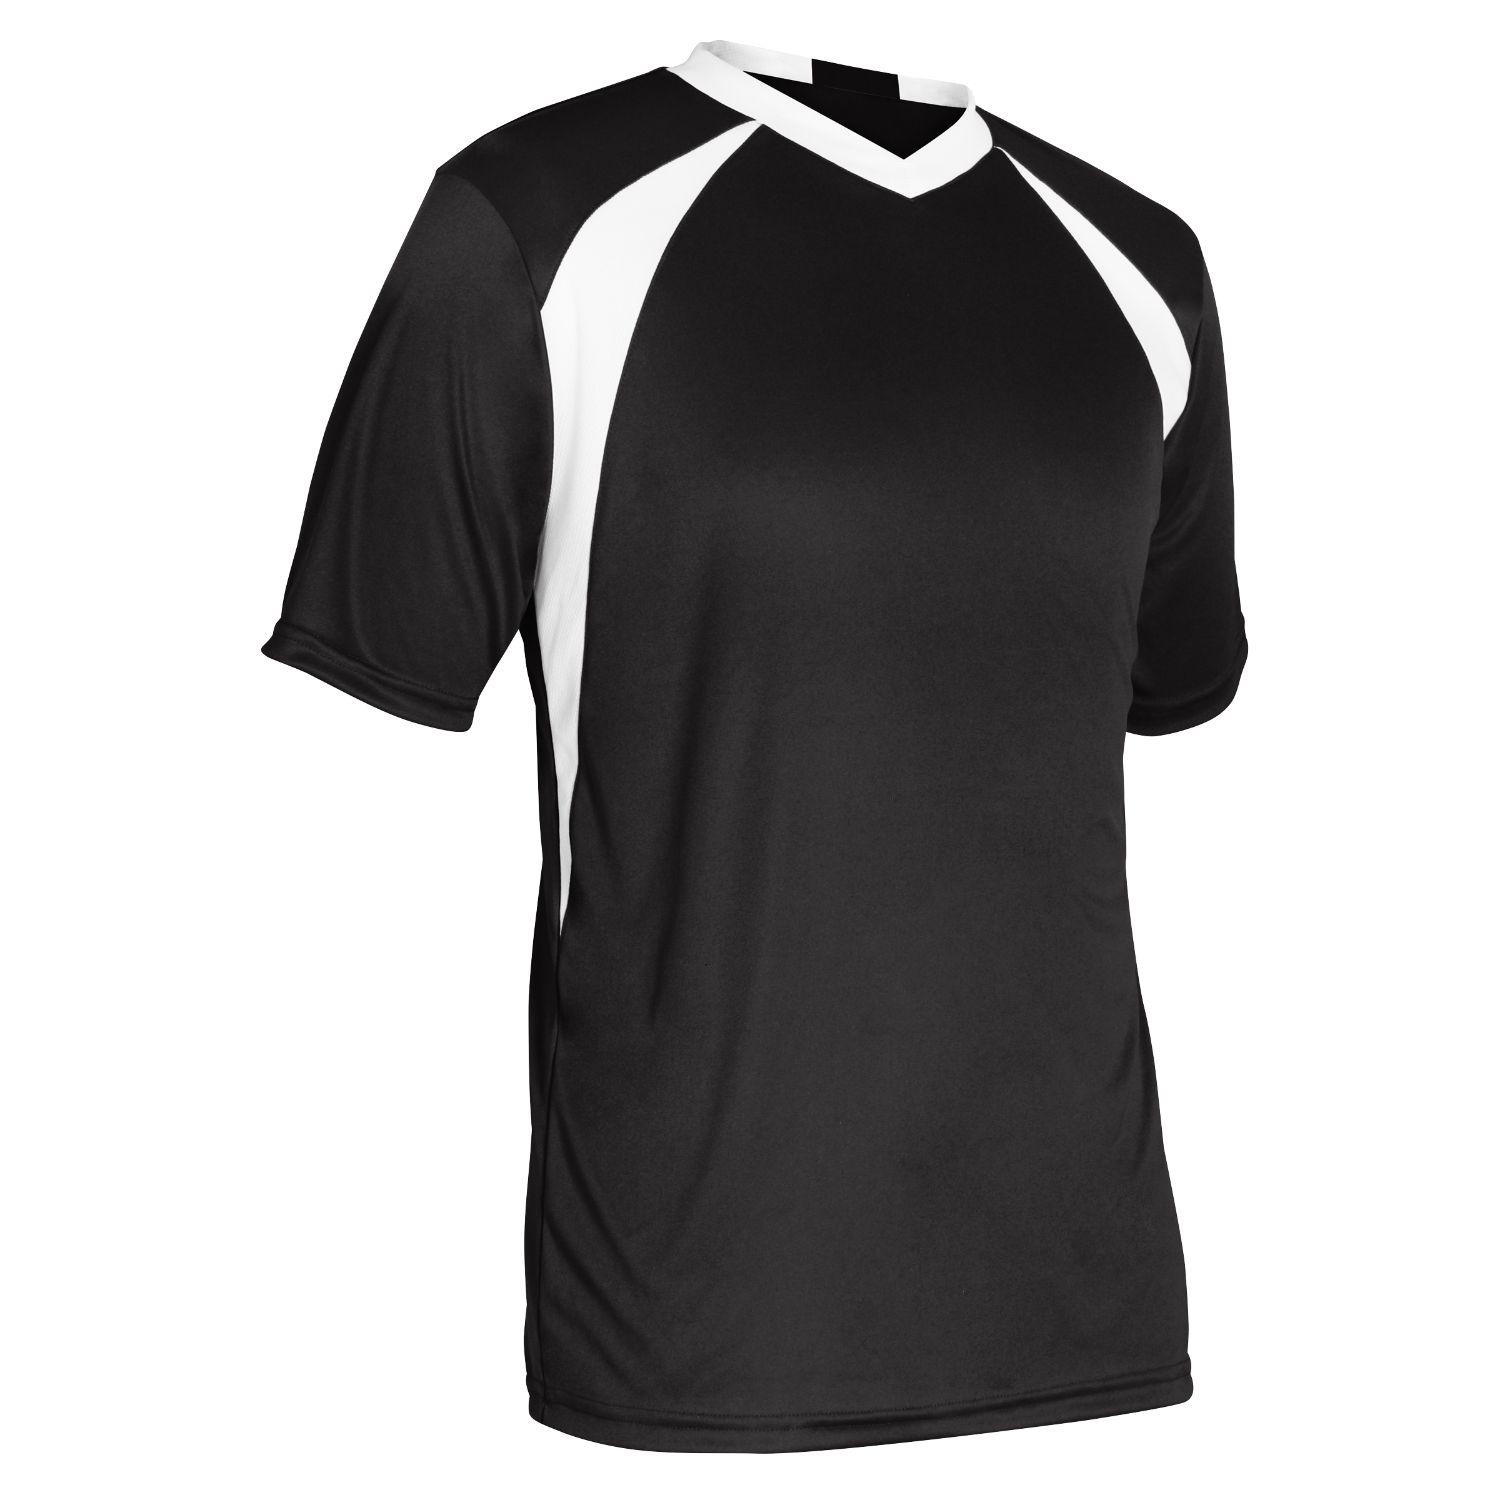 Champro Youth Sweeper Soccer Jersey Black White Extra Small